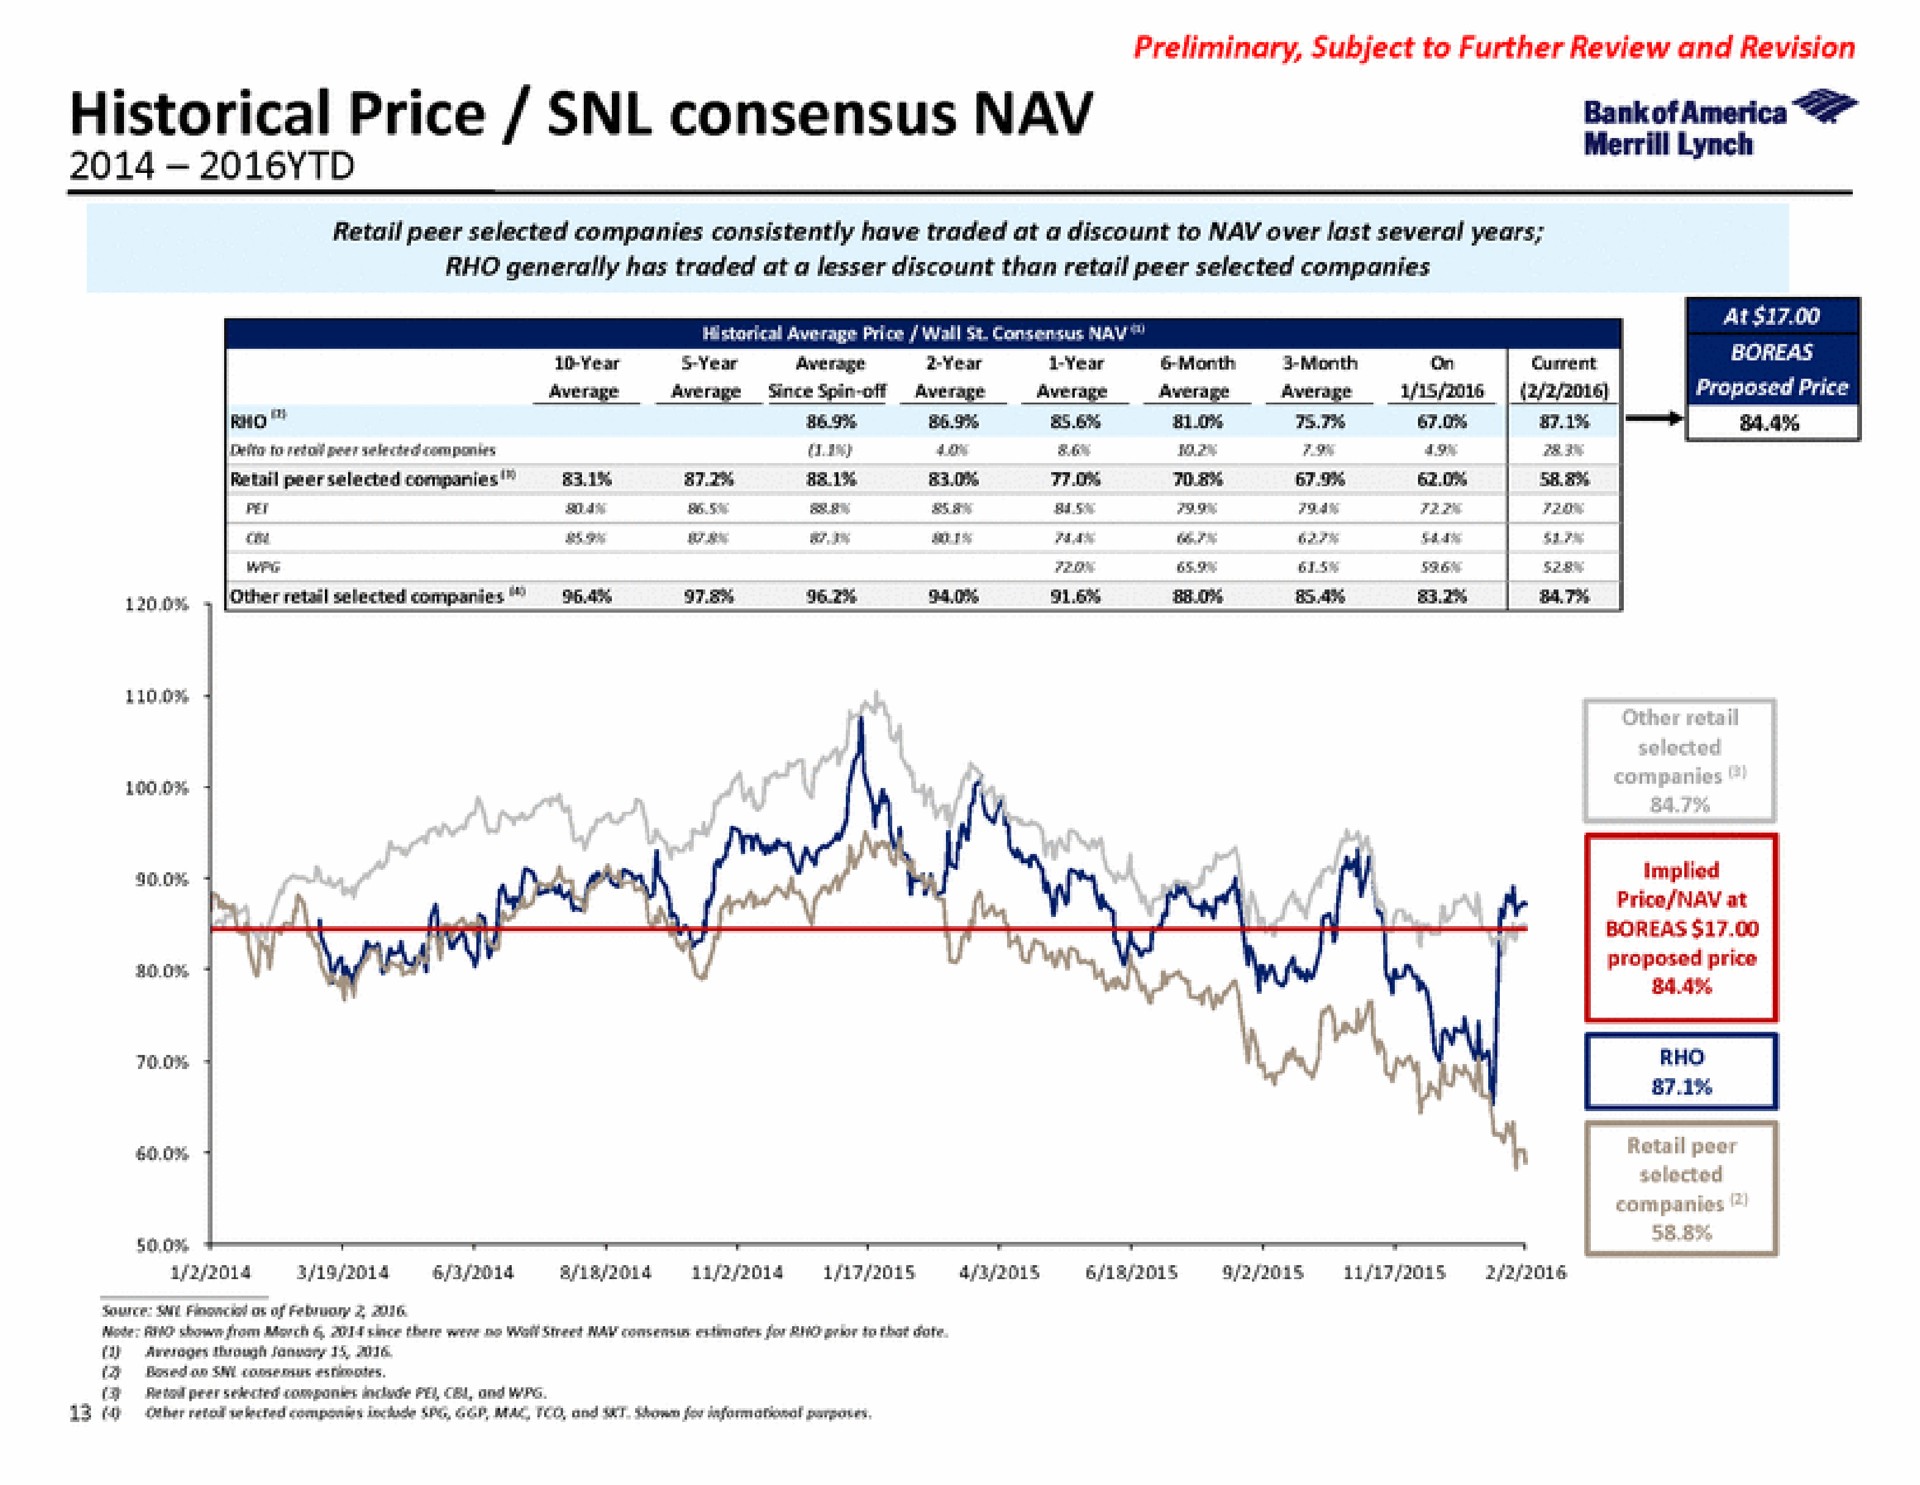 historical price consensus son a | Bank of America